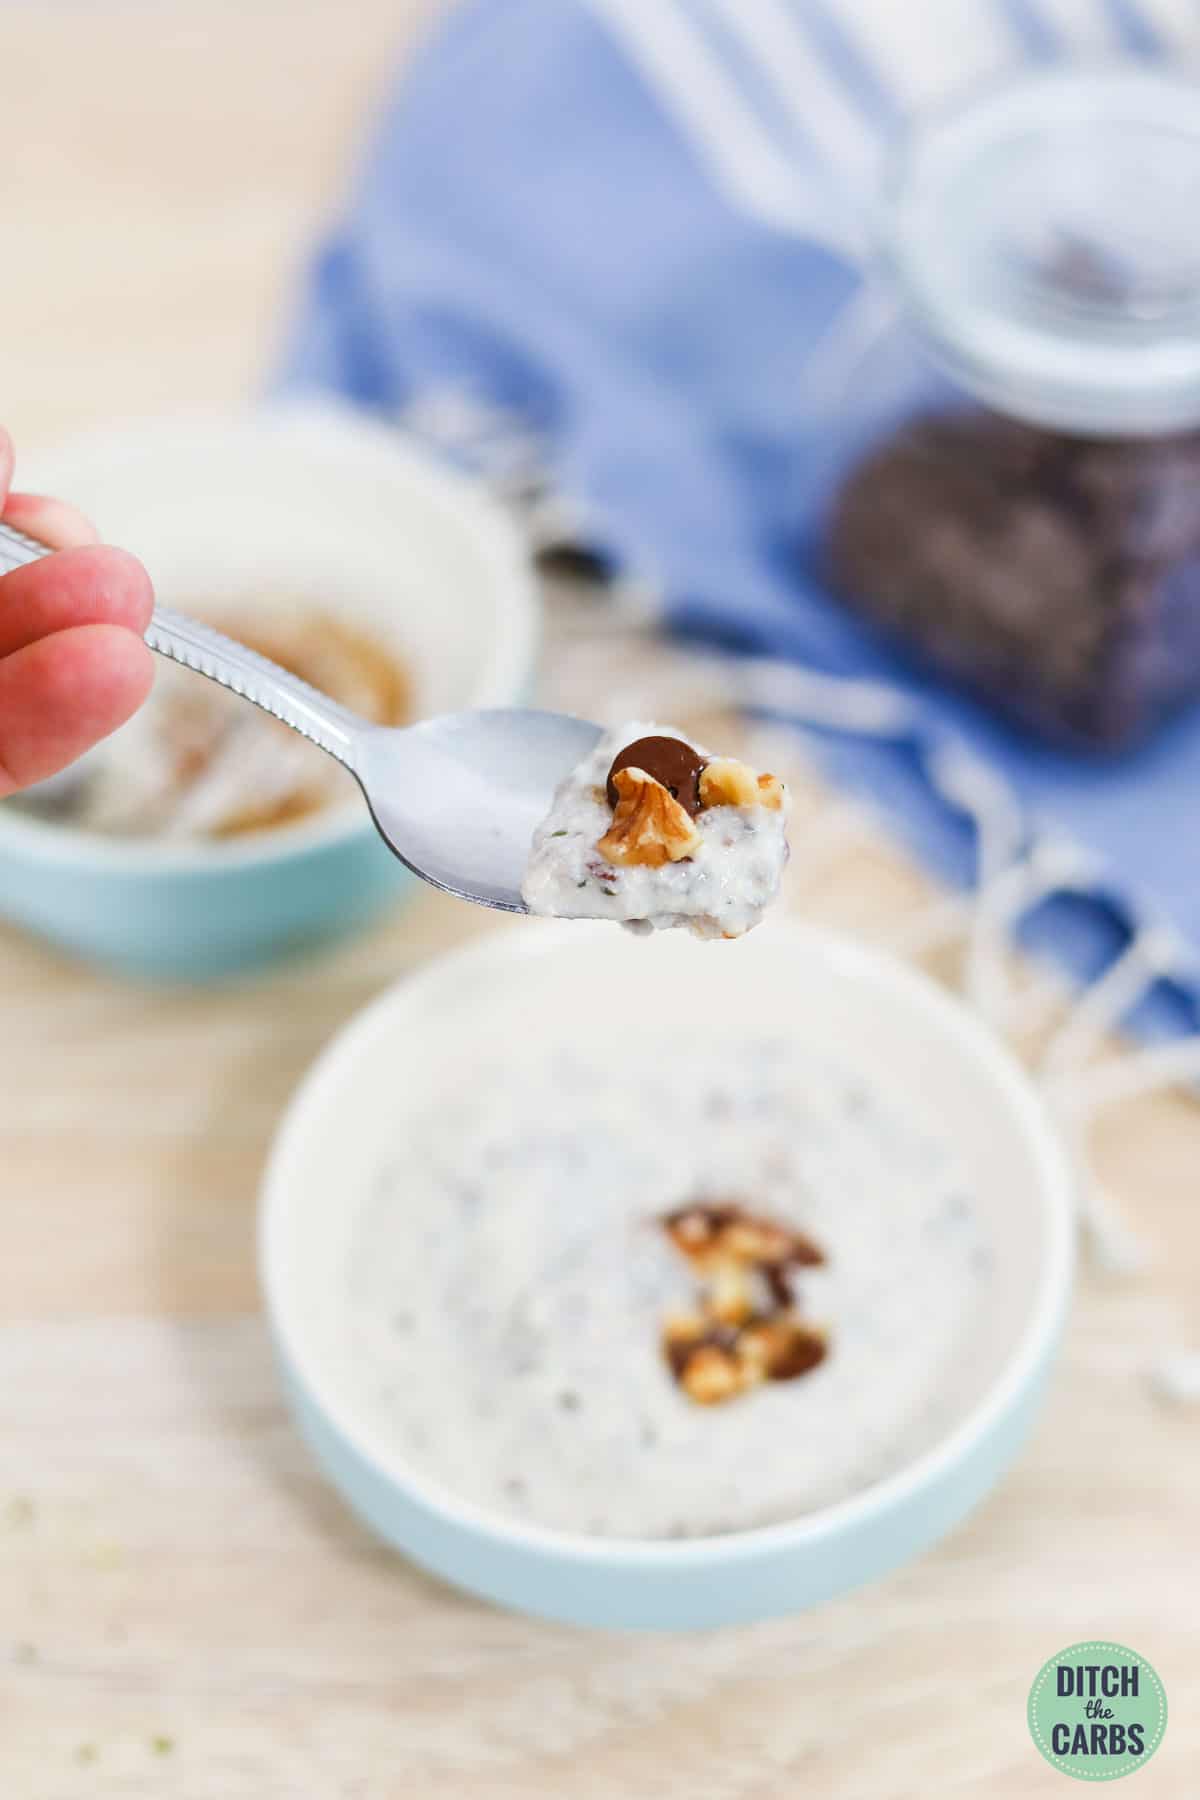 A spoon lifting a bite of keto oatmeal topped with sugar-free chocolate chips and walnuts.